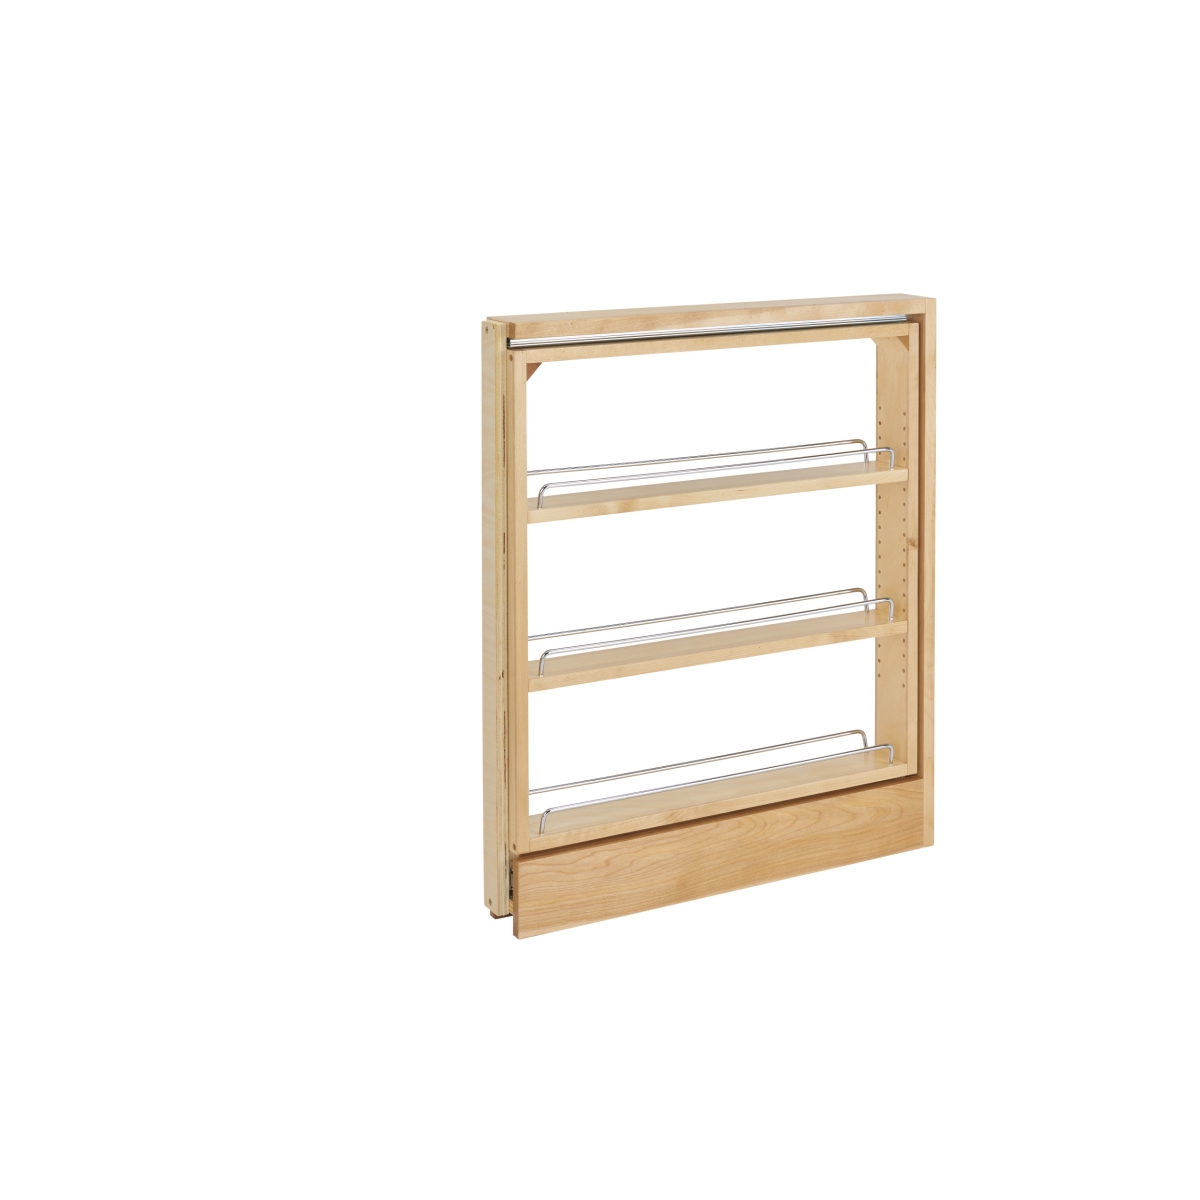 Rev A Shelf Rs438.bcsc.3c Base Cabinet Pullout Organizer With Top Slide Sink & Base Accessories, Natural Maple - 27.31 X 3 X 23 In.